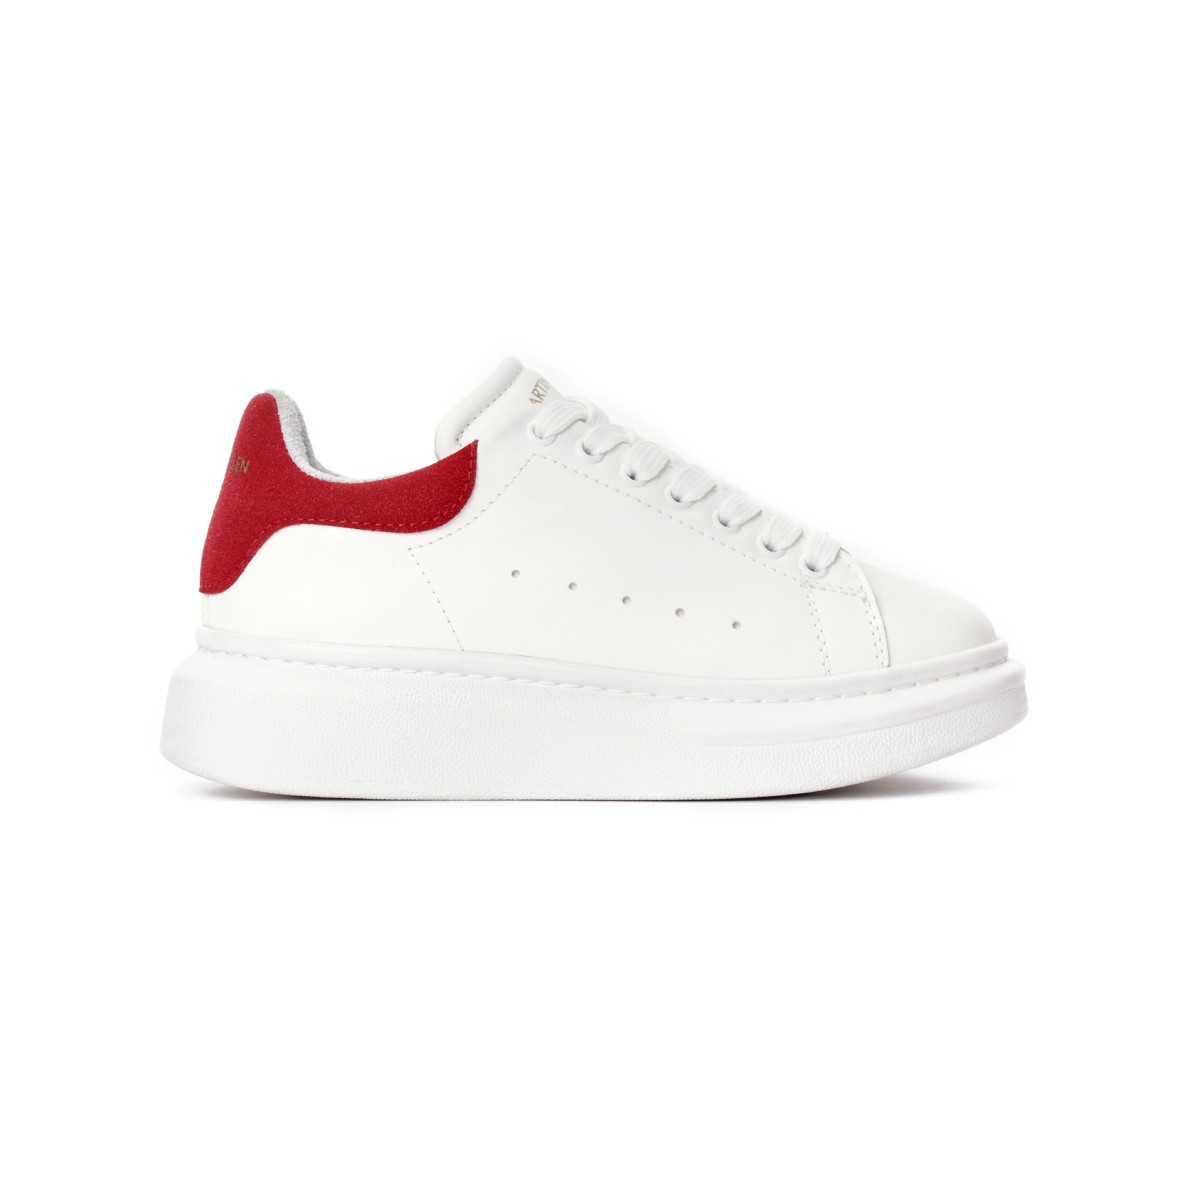 Martin Valen Women’s Chunky Sneakers in White and Red - White